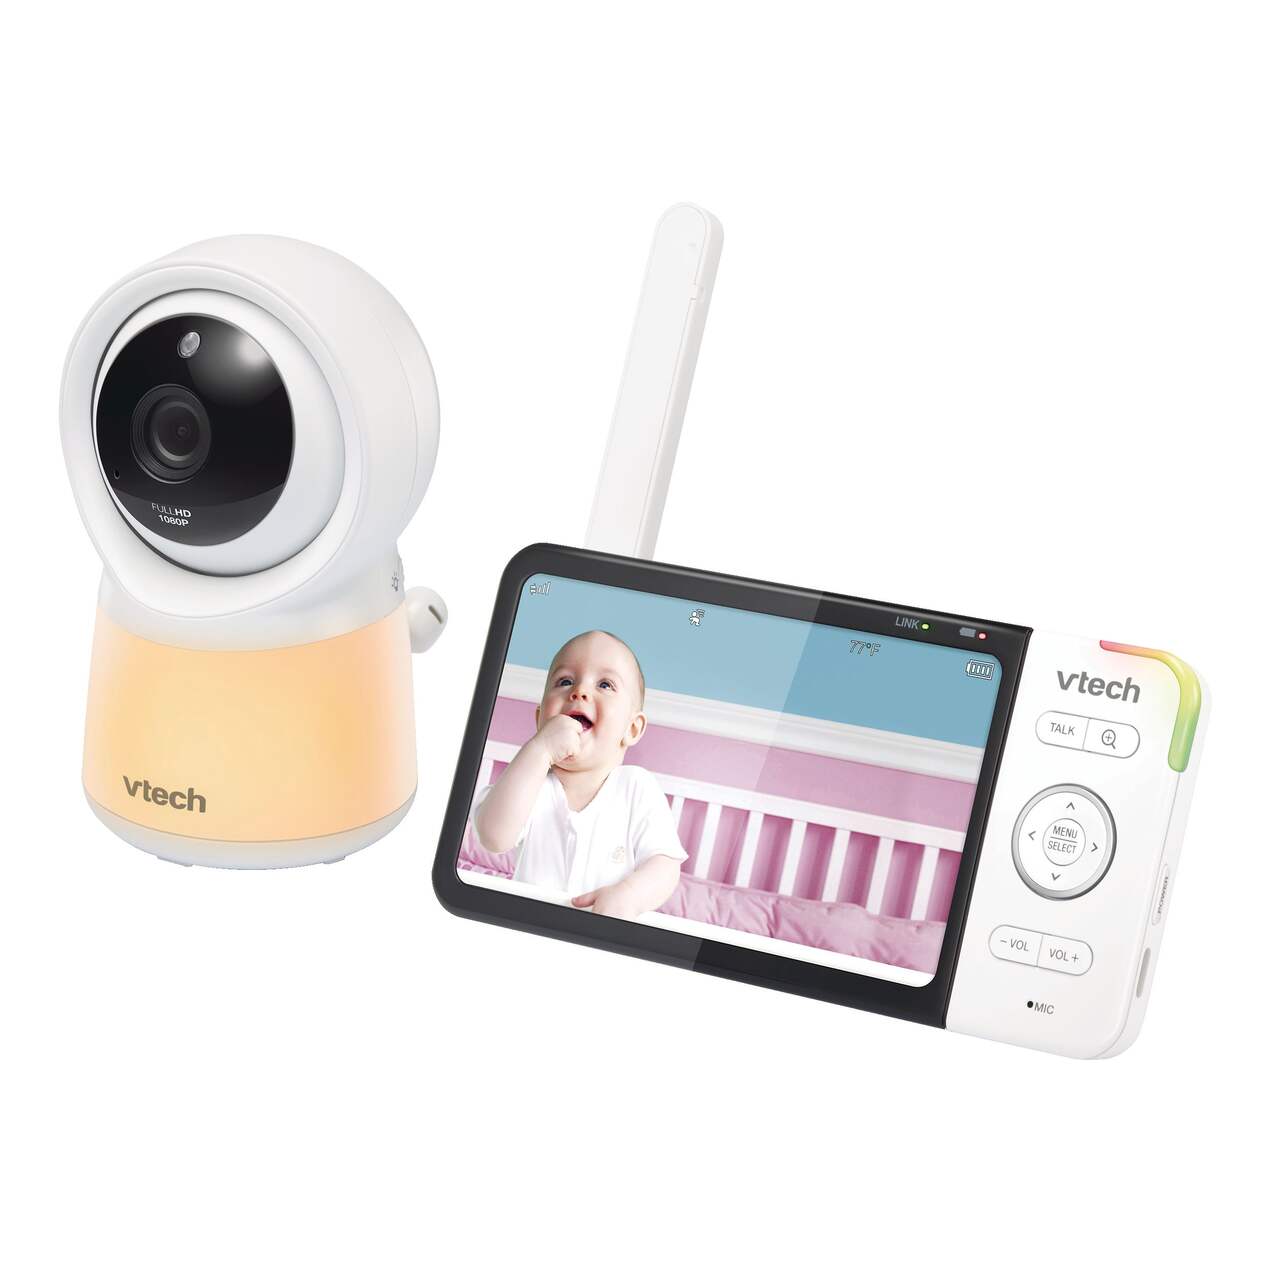 5 HD Video Baby Monitor for Complete Peace of Mind